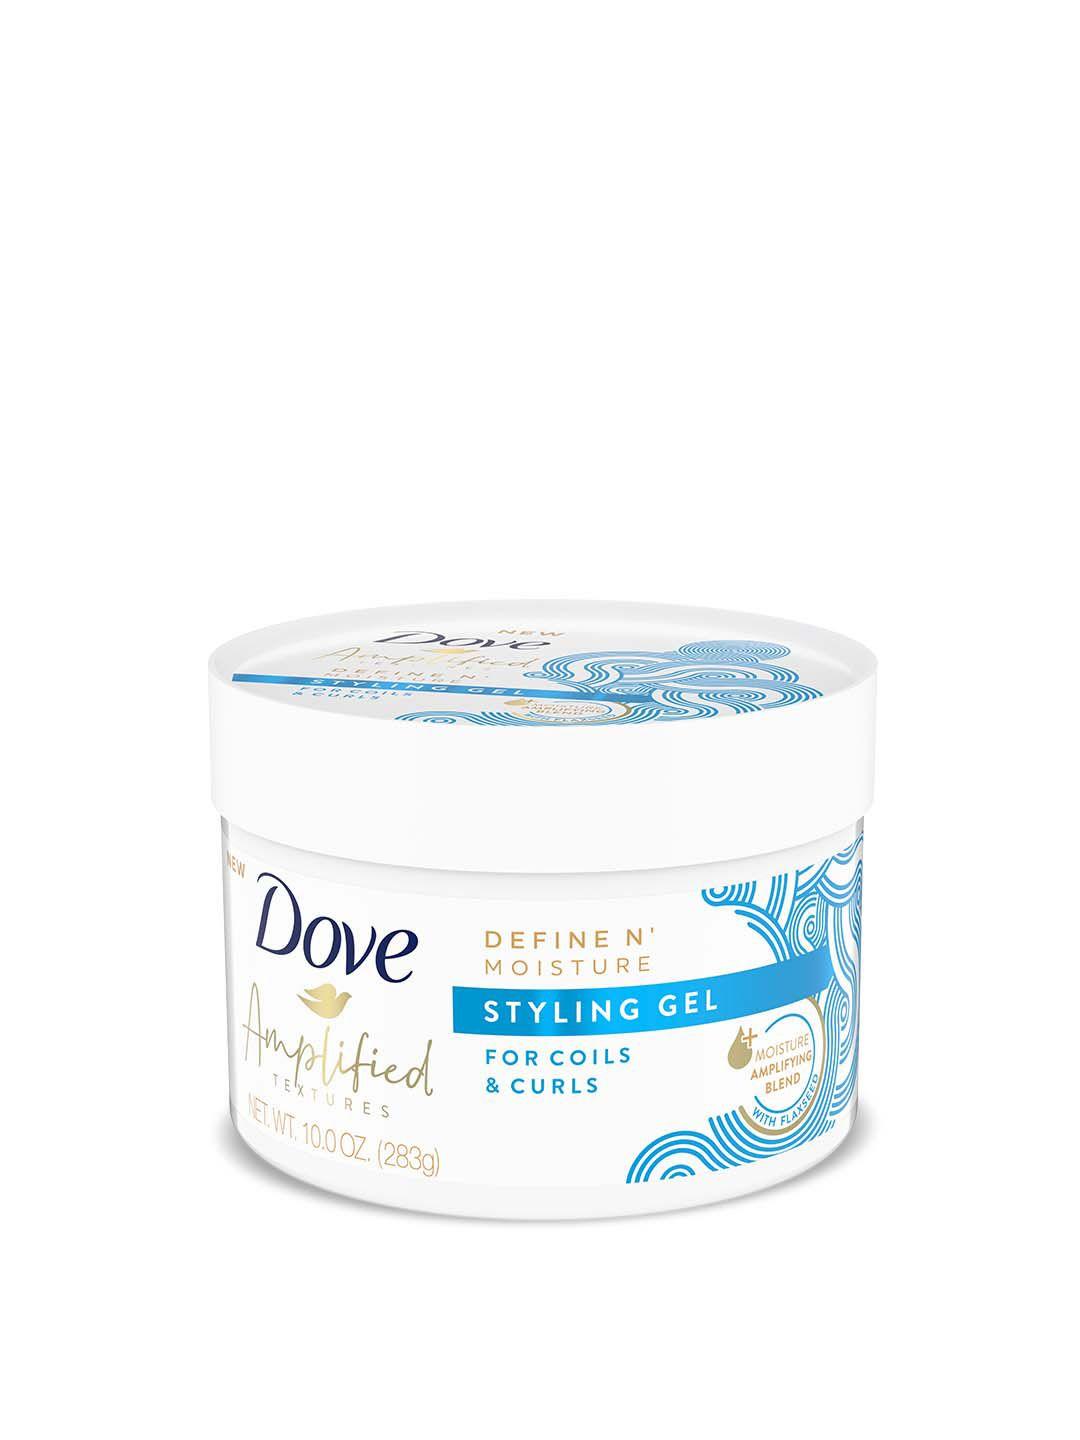 dove amplified textures define n moisture styling gel for coils & curly hair - 283 g